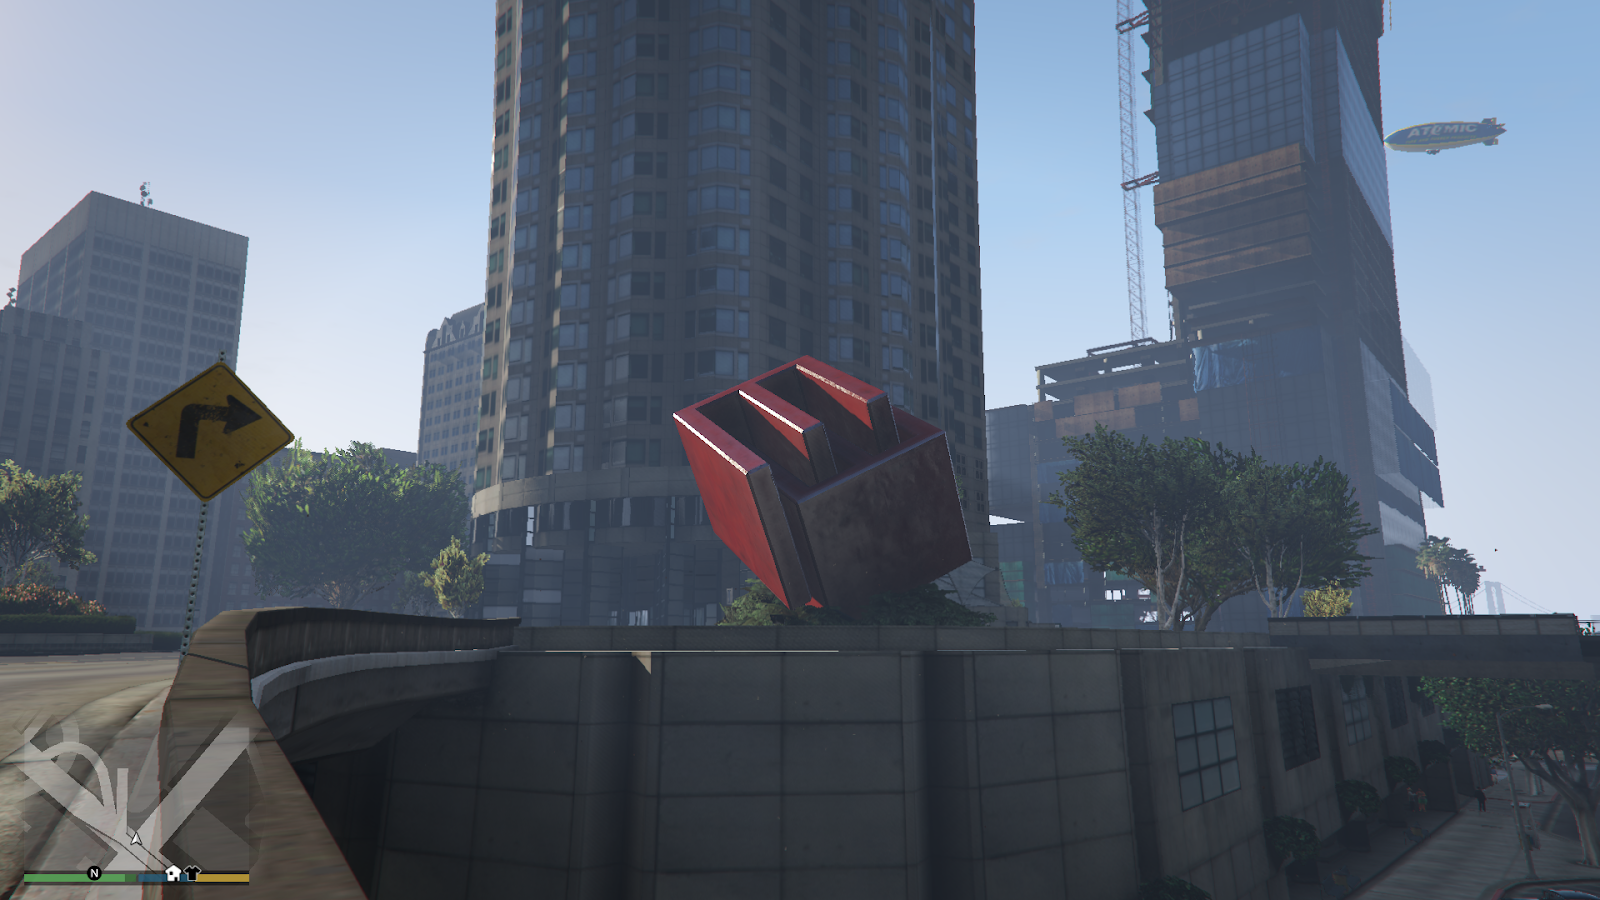 Where is Maze Bank in GTA 5? - Quora